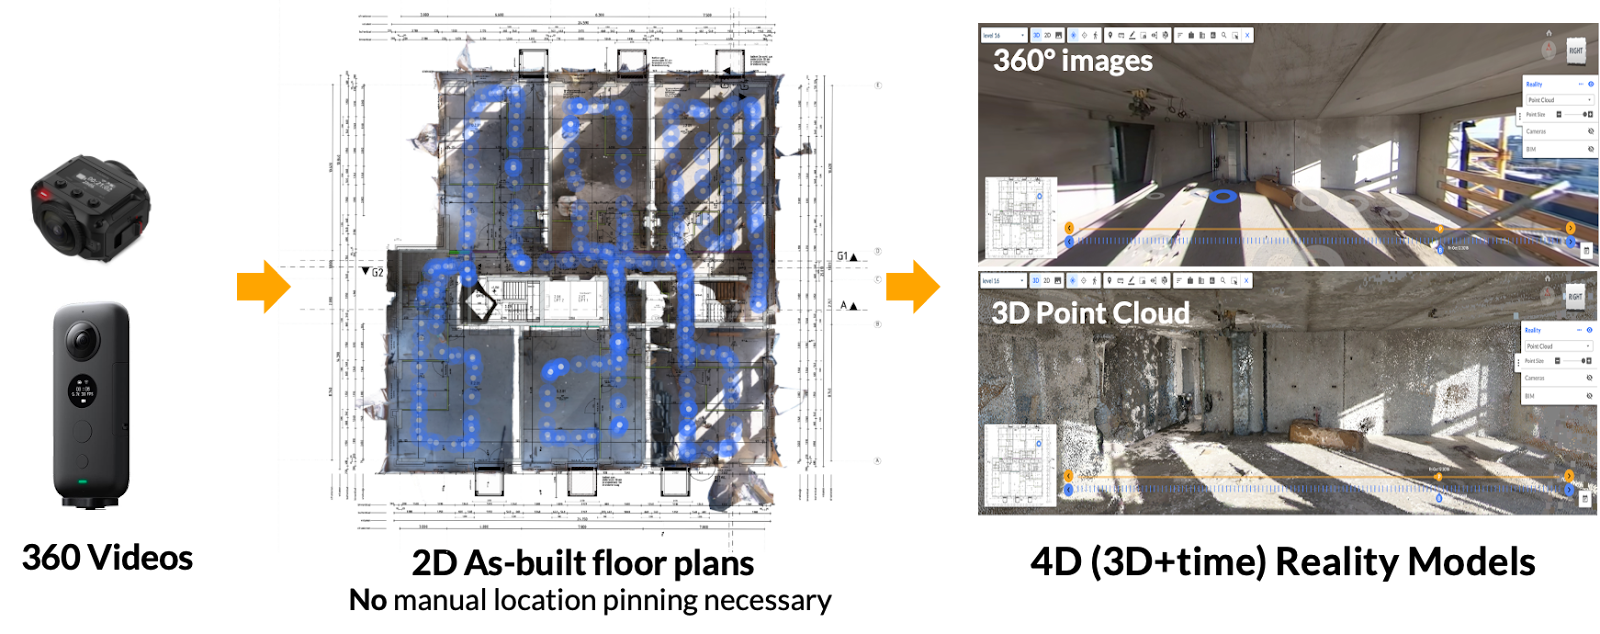 360-degree videos transform into 3D point clouds and detailed as-built reality floor plans